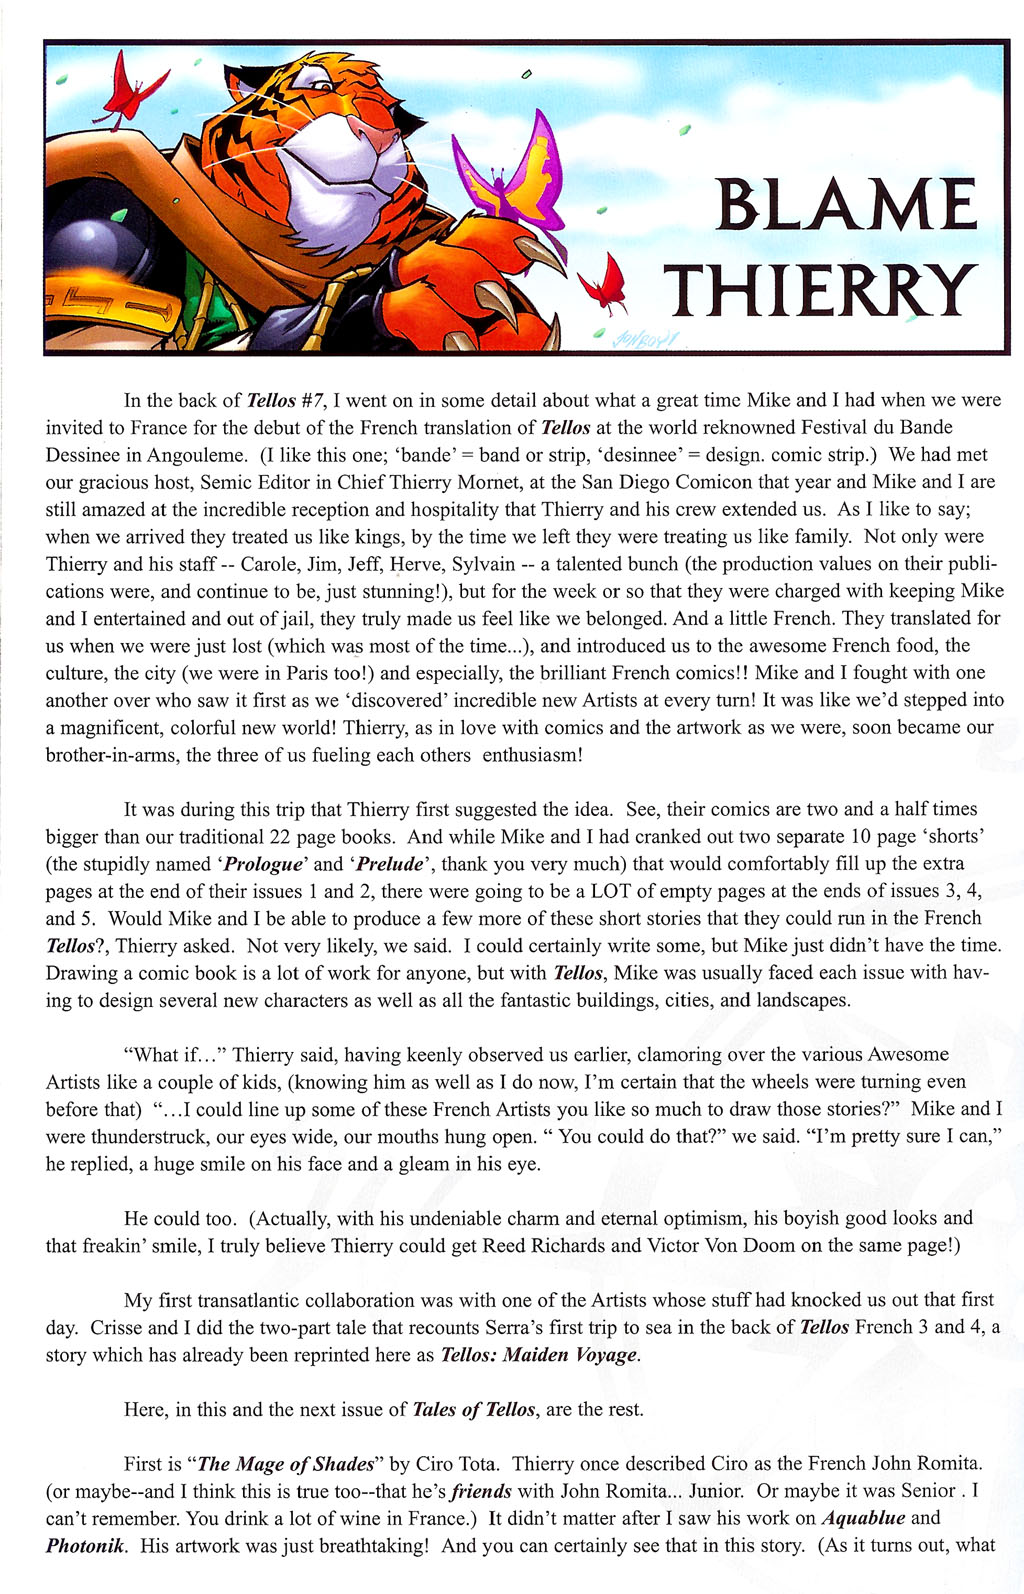 Read online Tales of Tellos comic -  Issue #2 - 18